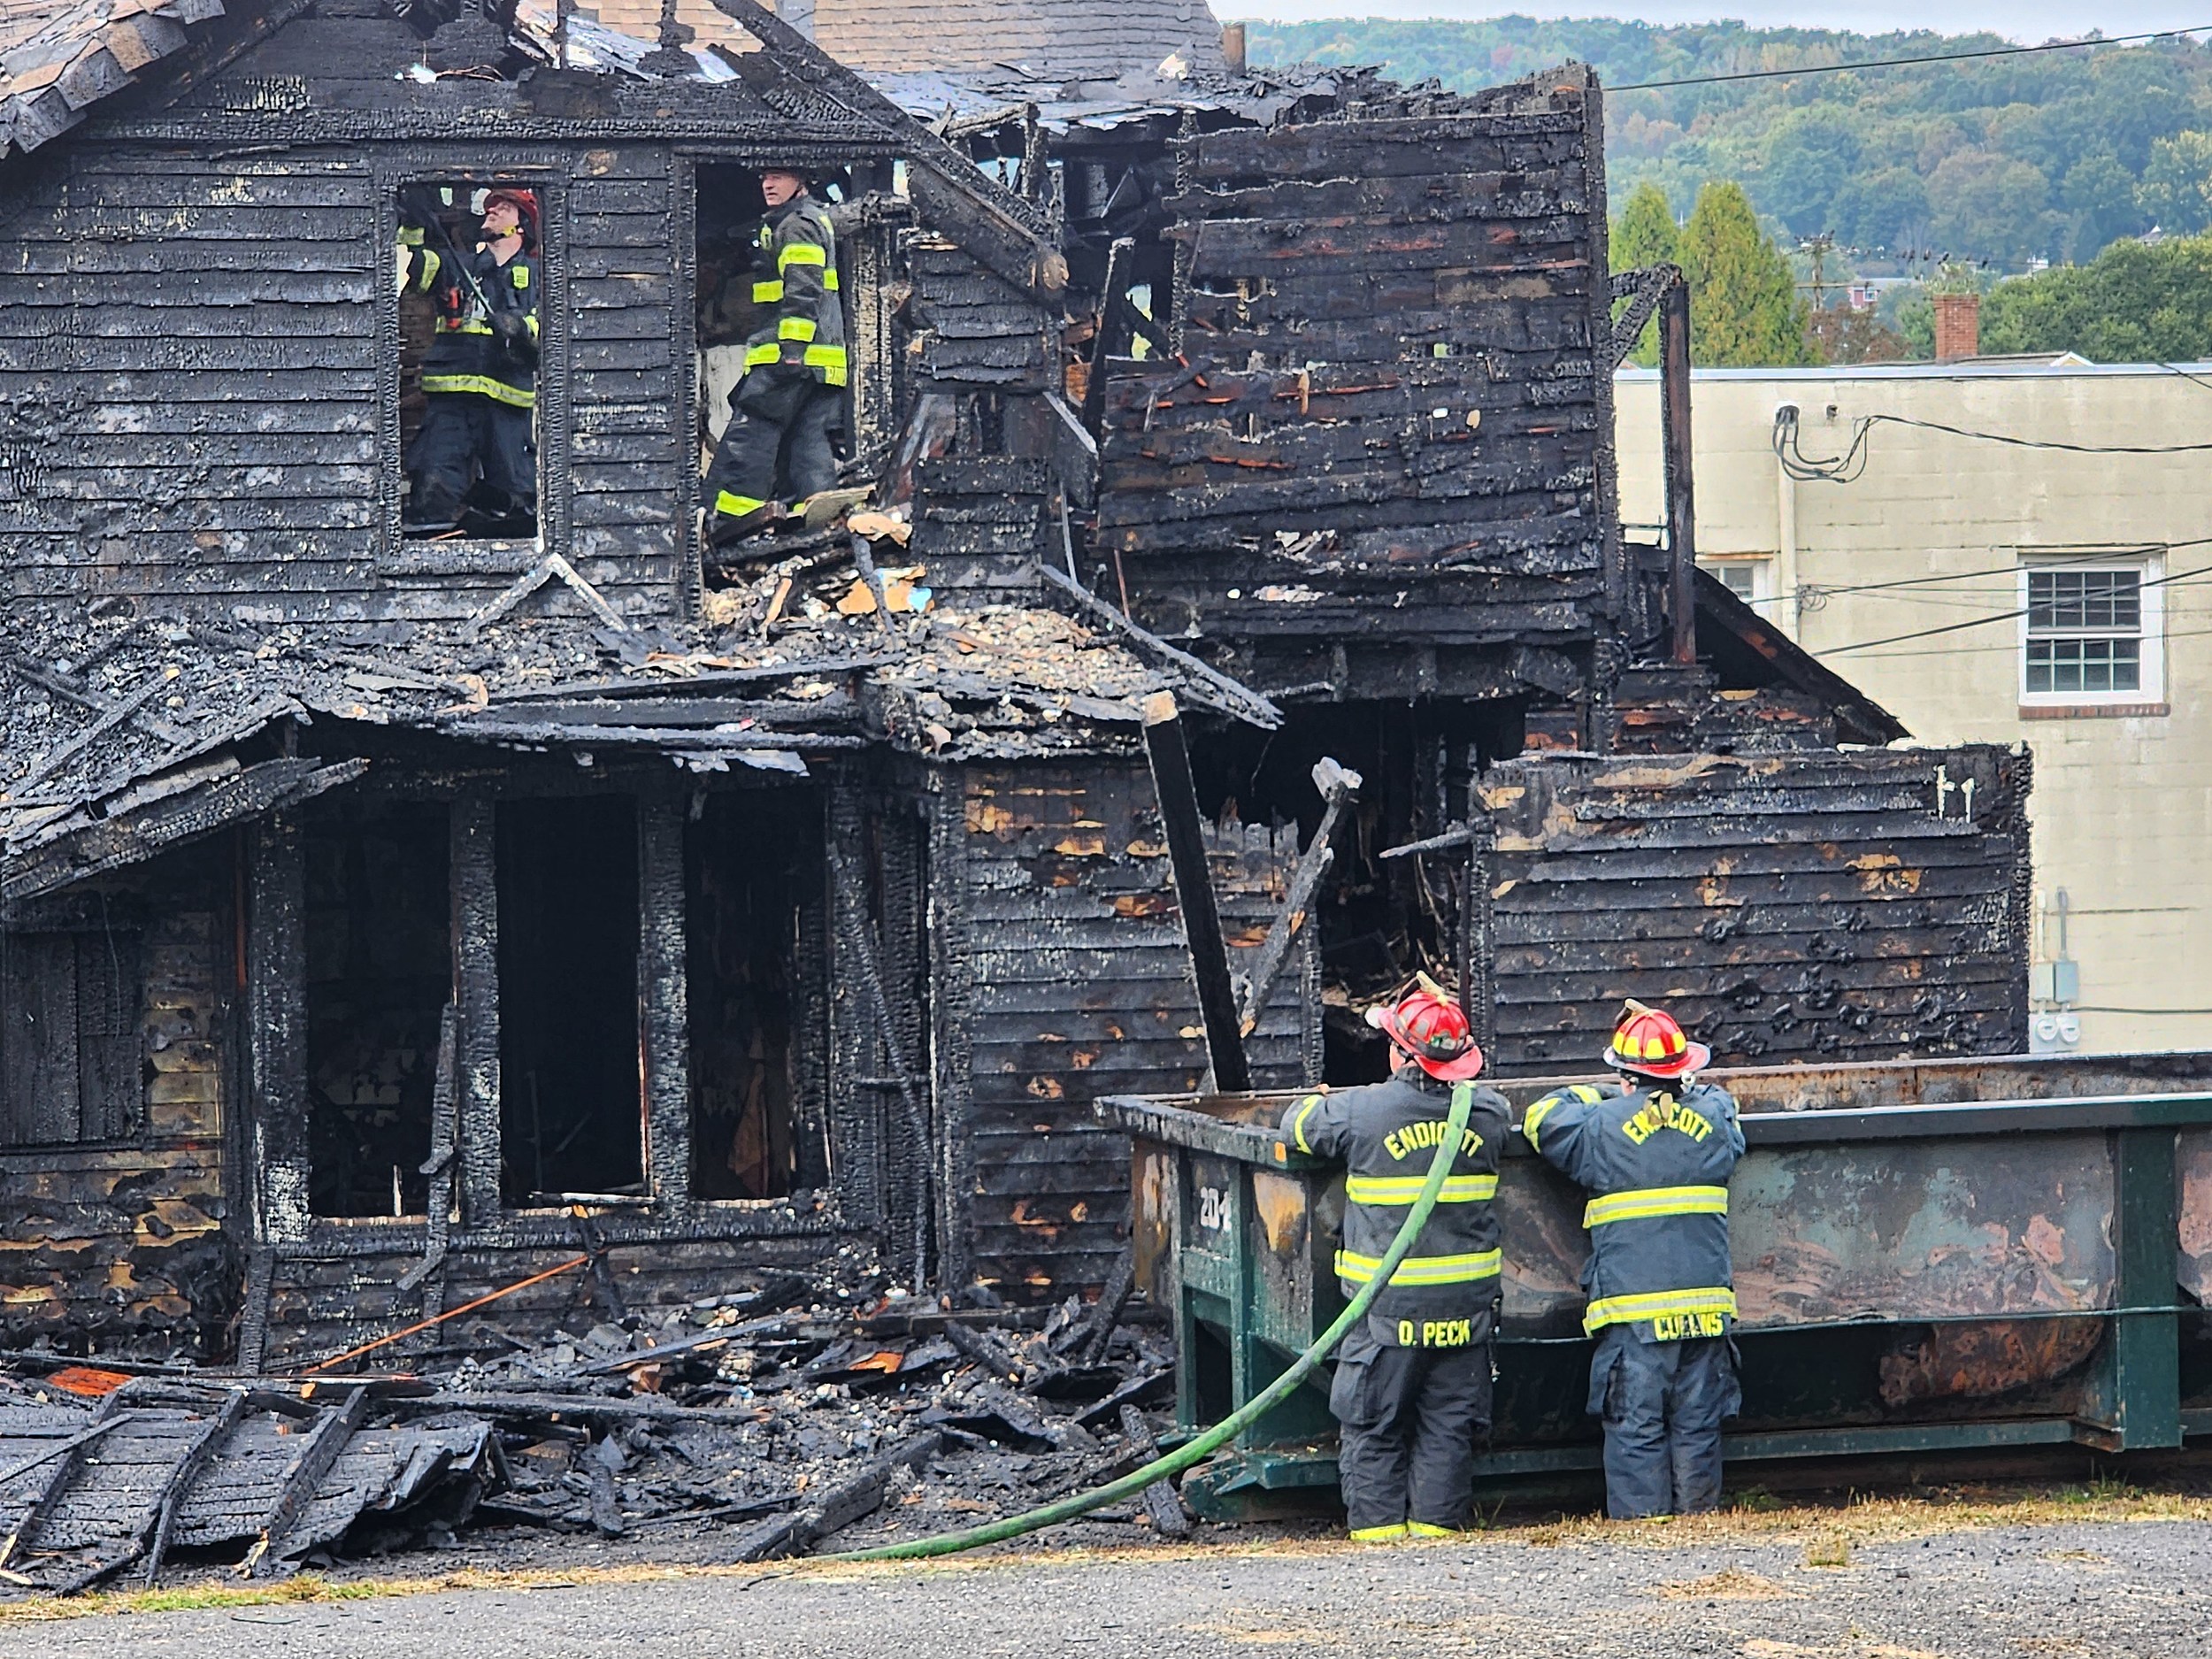 House in Endicotts Union District Heavily Damaged by Fire